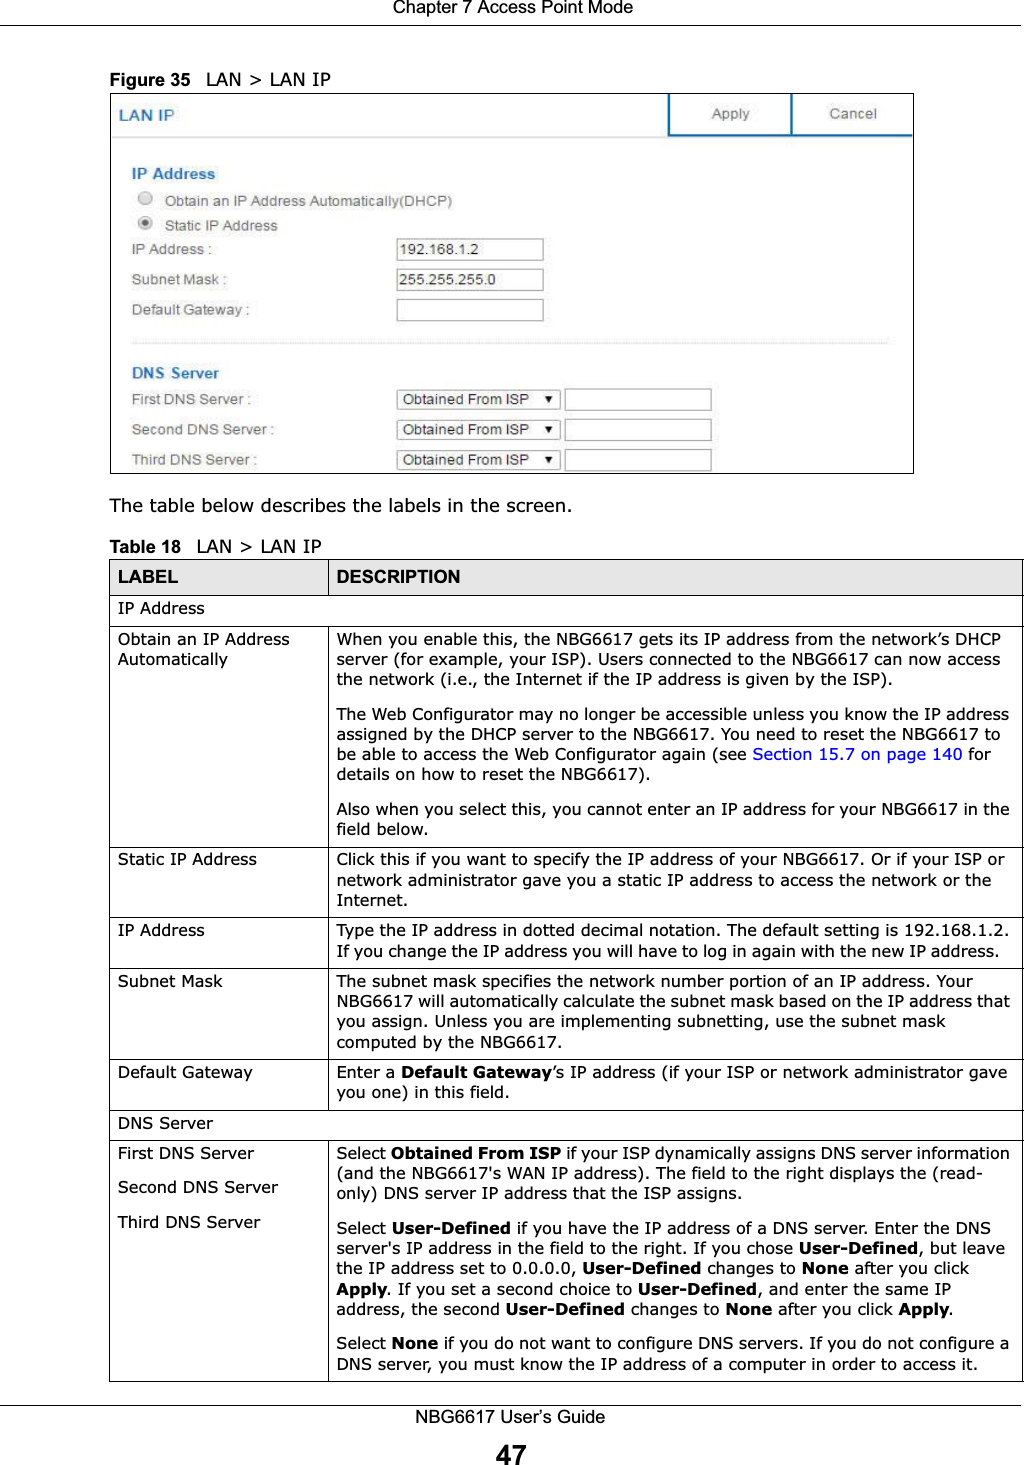  Chapter 7 Access Point ModeNBG6617 User’s Guide47Figure 35   LAN &gt; LAN IP   The table below describes the labels in the screen.Table 18   LAN &gt; LAN IPLABEL DESCRIPTIONIP AddressObtain an IP Address AutomaticallyWhen you enable this, the NBG6617 gets its IP address from the network’s DHCP server (for example, your ISP). Users connected to the NBG6617 can now access the network (i.e., the Internet if the IP address is given by the ISP).The Web Configurator may no longer be accessible unless you know the IP address assigned by the DHCP server to the NBG6617. You need to reset the NBG6617 to be able to access the Web Configurator again (see Section 15.7 on page 140 for details on how to reset the NBG6617).Also when you select this, you cannot enter an IP address for your NBG6617 in the field below.Static IP Address Click this if you want to specify the IP address of your NBG6617. Or if your ISP or network administrator gave you a static IP address to access the network or the Internet.IP Address Type the IP address in dotted decimal notation. The default setting is 192.168.1.2. If you change the IP address you will have to log in again with the new IP address.   Subnet Mask The subnet mask specifies the network number portion of an IP address. Your NBG6617 will automatically calculate the subnet mask based on the IP address that you assign. Unless you are implementing subnetting, use the subnet mask computed by the NBG6617.Default Gateway Enter a Default Gateway’s IP address (if your ISP or network administrator gave you one) in this field.DNS ServerFirst DNS ServerSecond DNS ServerThird DNS Server Select Obtained From ISP if your ISP dynamically assigns DNS server information (and the NBG6617&apos;s WAN IP address). The field to the right displays the (read-only) DNS server IP address that the ISP assigns. Select User-Defined if you have the IP address of a DNS server. Enter the DNS server&apos;s IP address in the field to the right. If you chose User-Defined, but leave the IP address set to 0.0.0.0, User-Defined changes to None after you click Apply. If you set a second choice to User-Defined, and enter the same IP address, the second User-Defined changes to None after you click Apply. Select None if you do not want to configure DNS servers. If you do not configure a DNS server, you must know the IP address of a computer in order to access it.